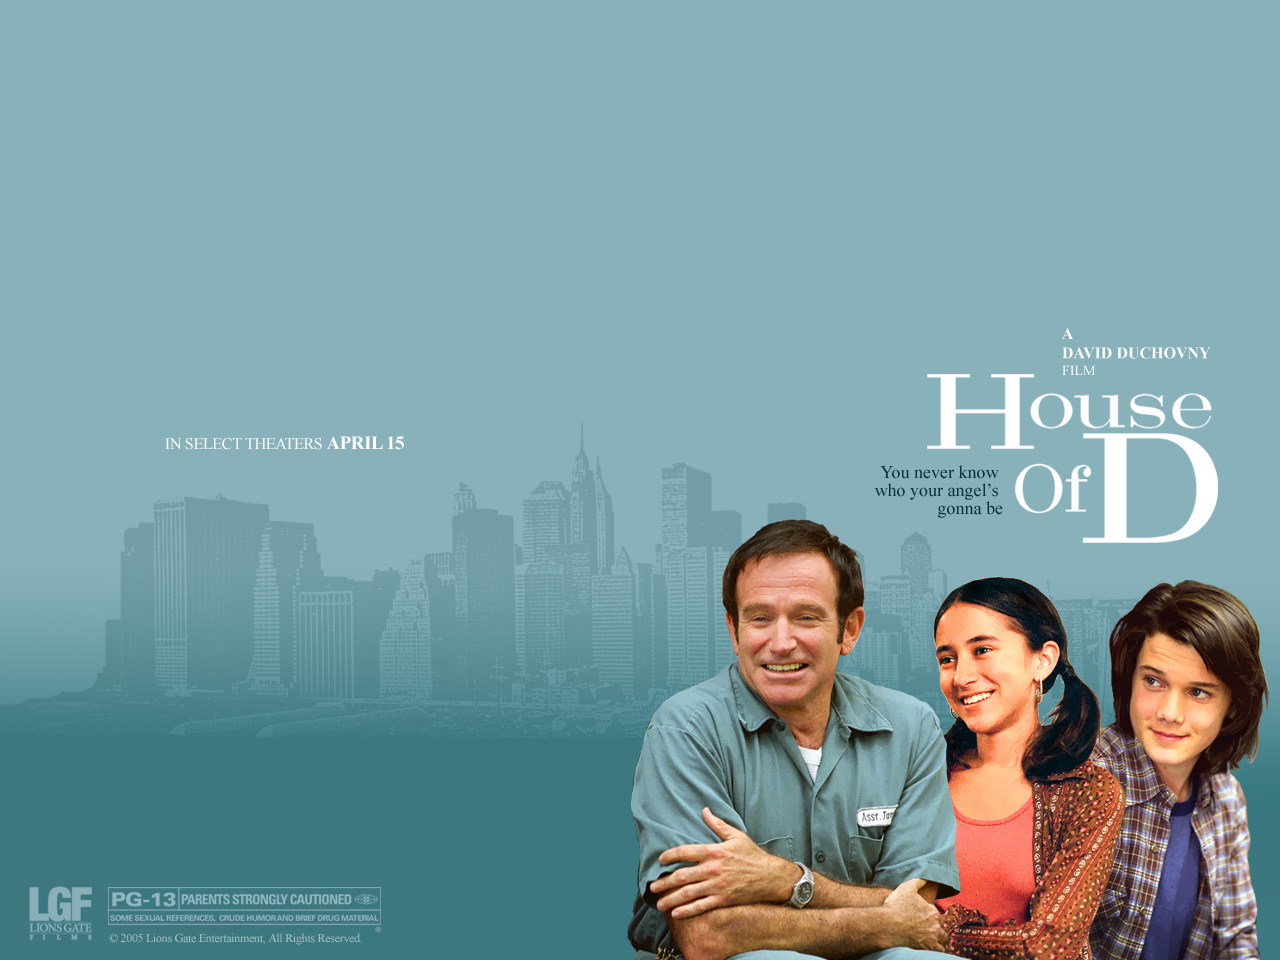 Robin Williams In House Of D Wallpaper - House Of D - 1280x960 Wallpaper -  